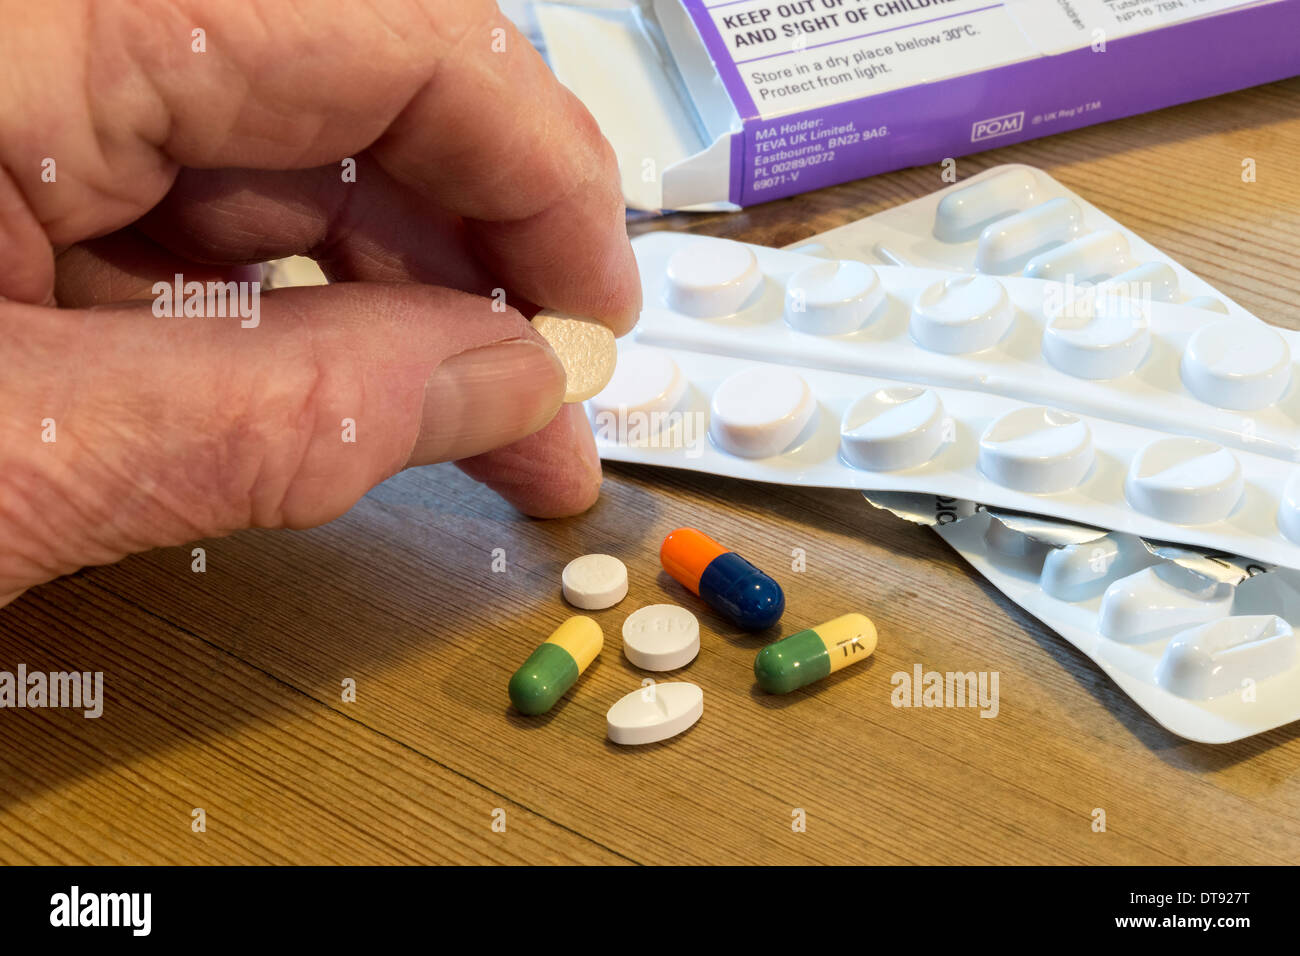 Elderly man's hand with selection of pills for daily medication. Stock Photo